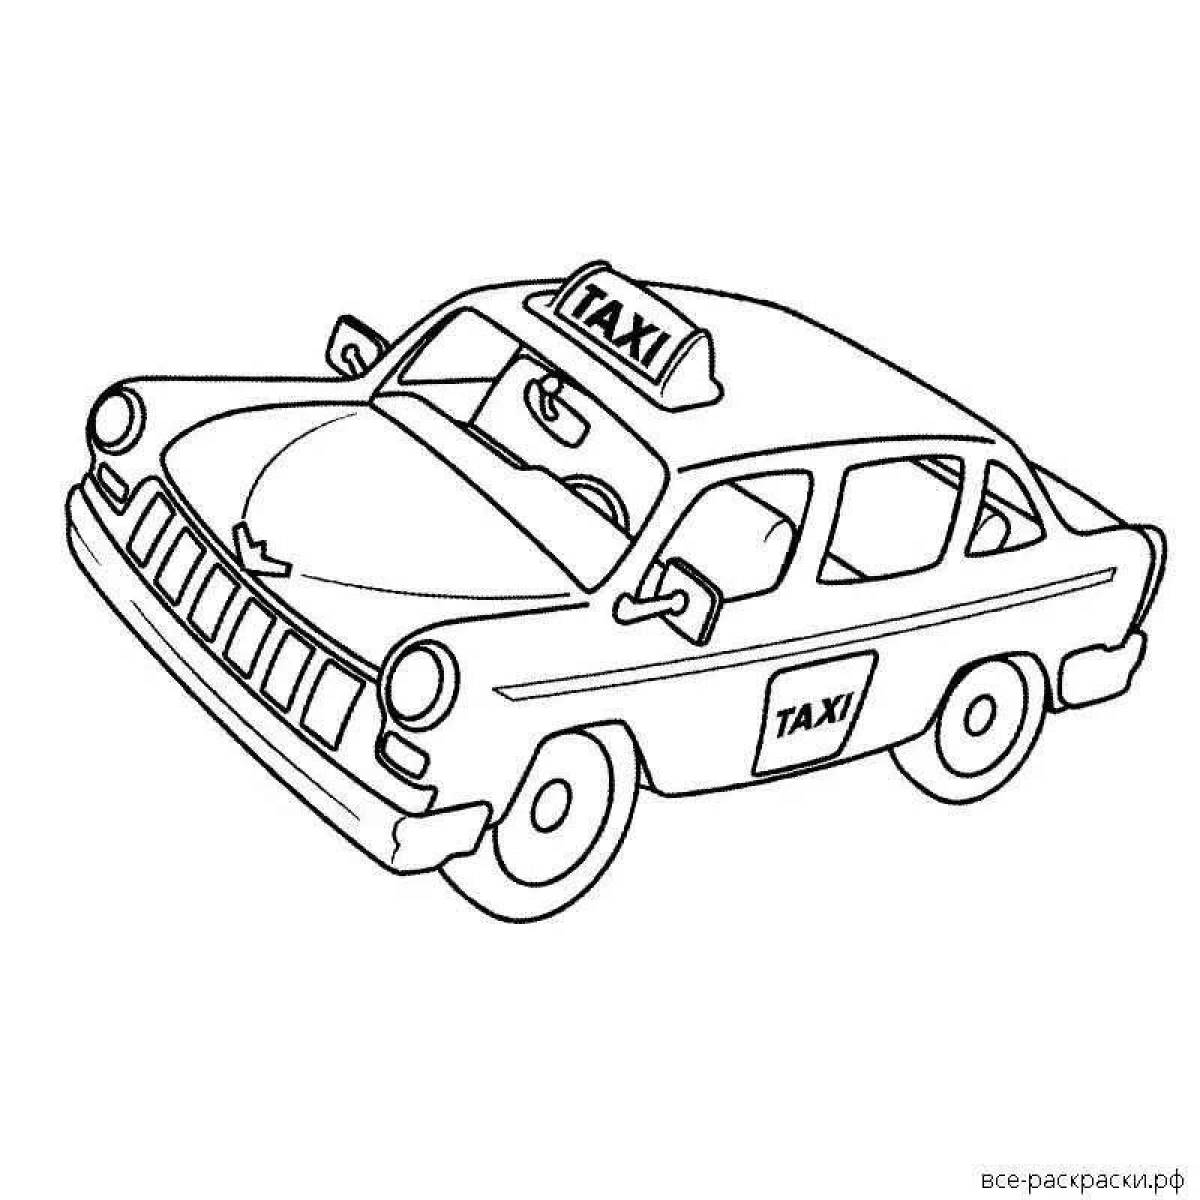 Glorious taxi yandex coloring book